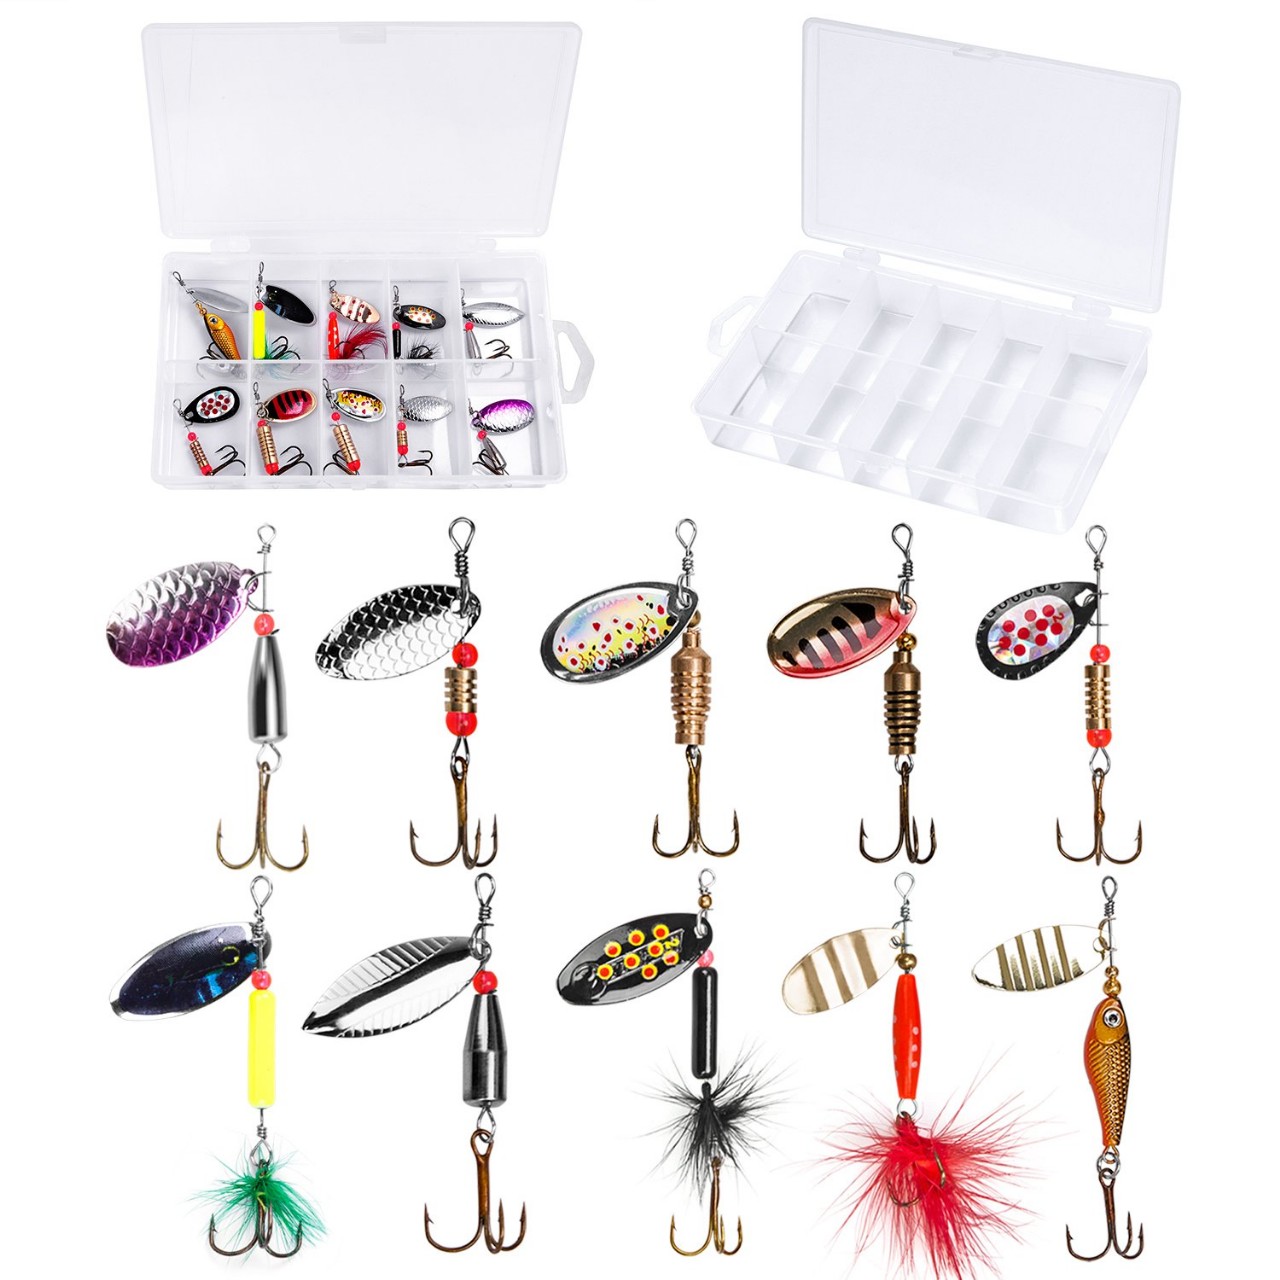 PLUSINNO Fishing Lures for Bass 16pcs Spinner Lures with Portable Carry Bag,Bass Lures Trout Lures H